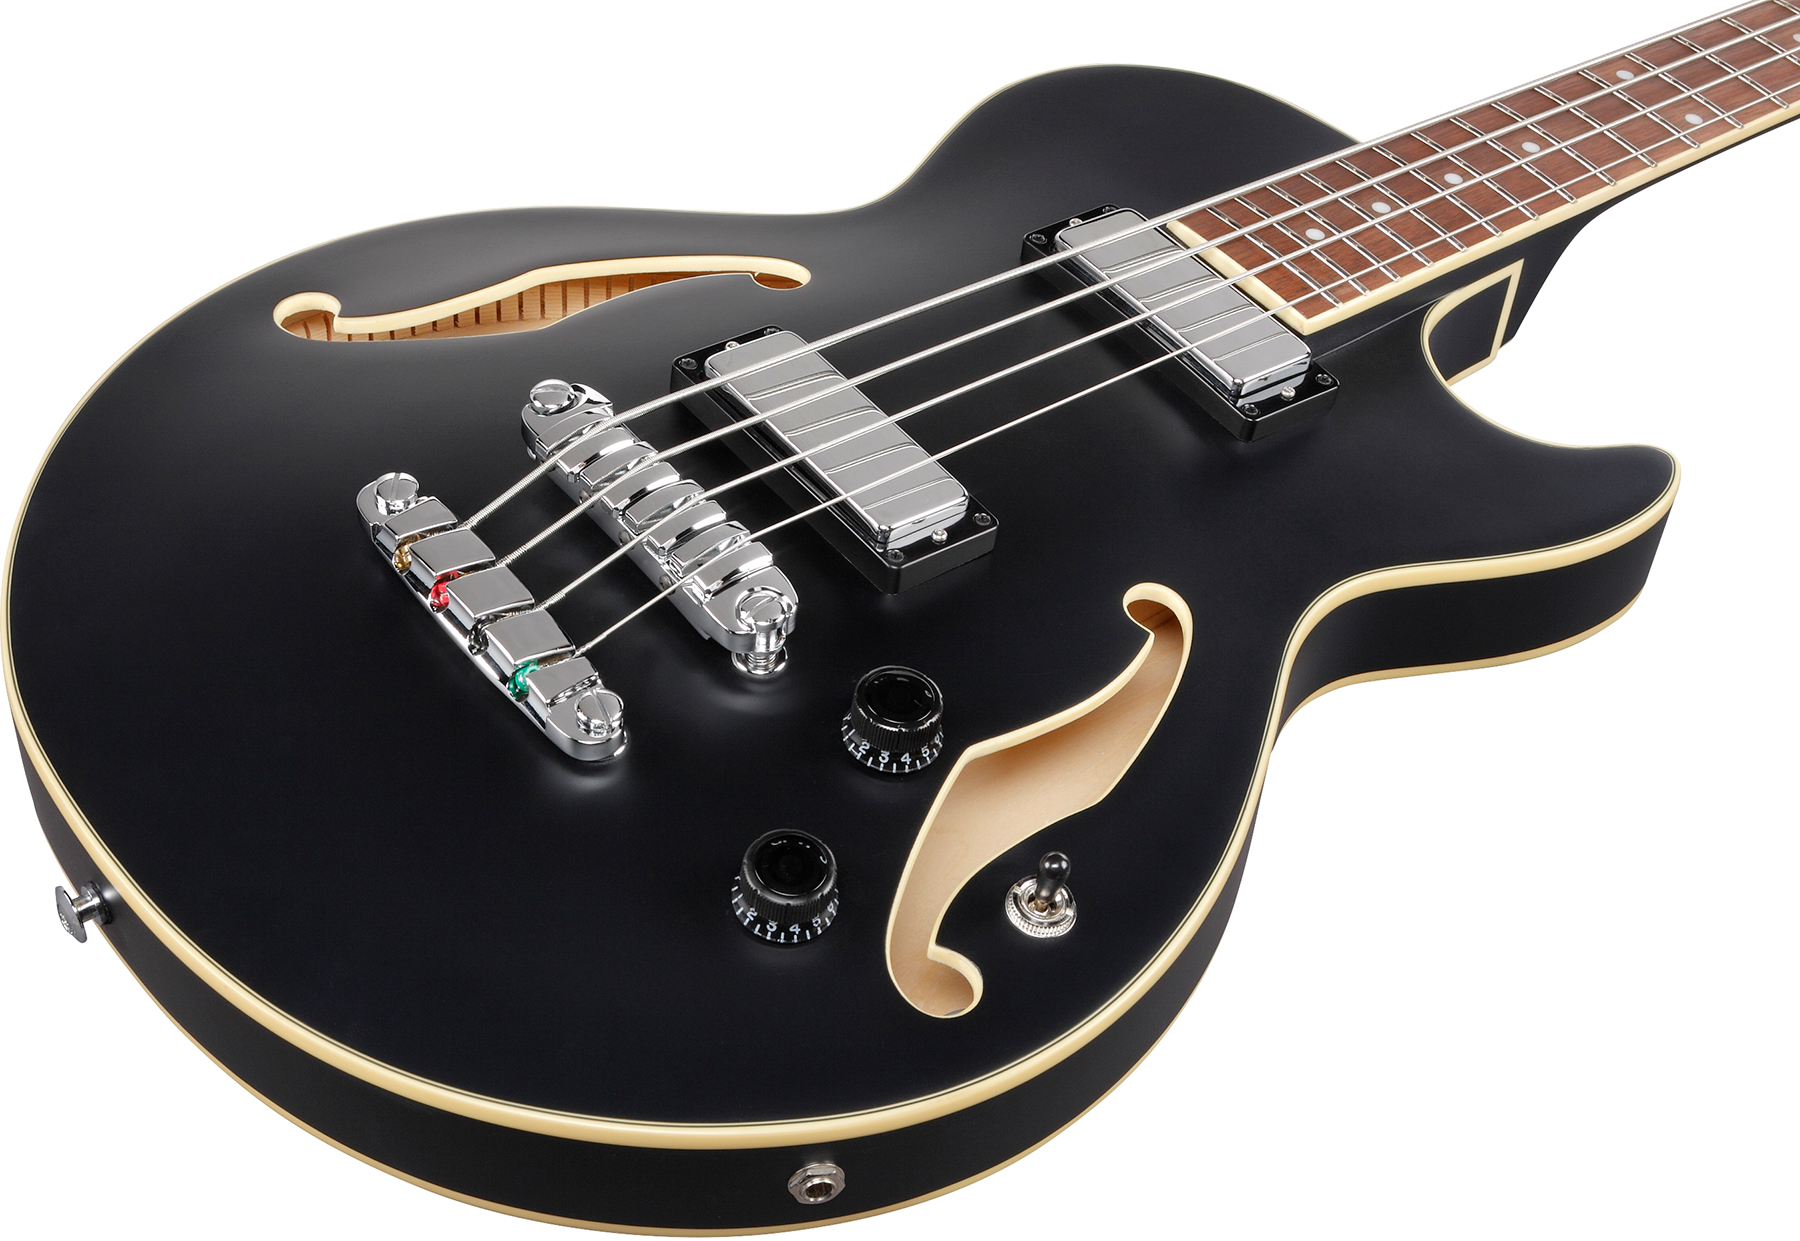 Ibanez Agb200 Bkf Artcore Noy - Black Flat - Semi & hollow-body electric bass - Variation 2